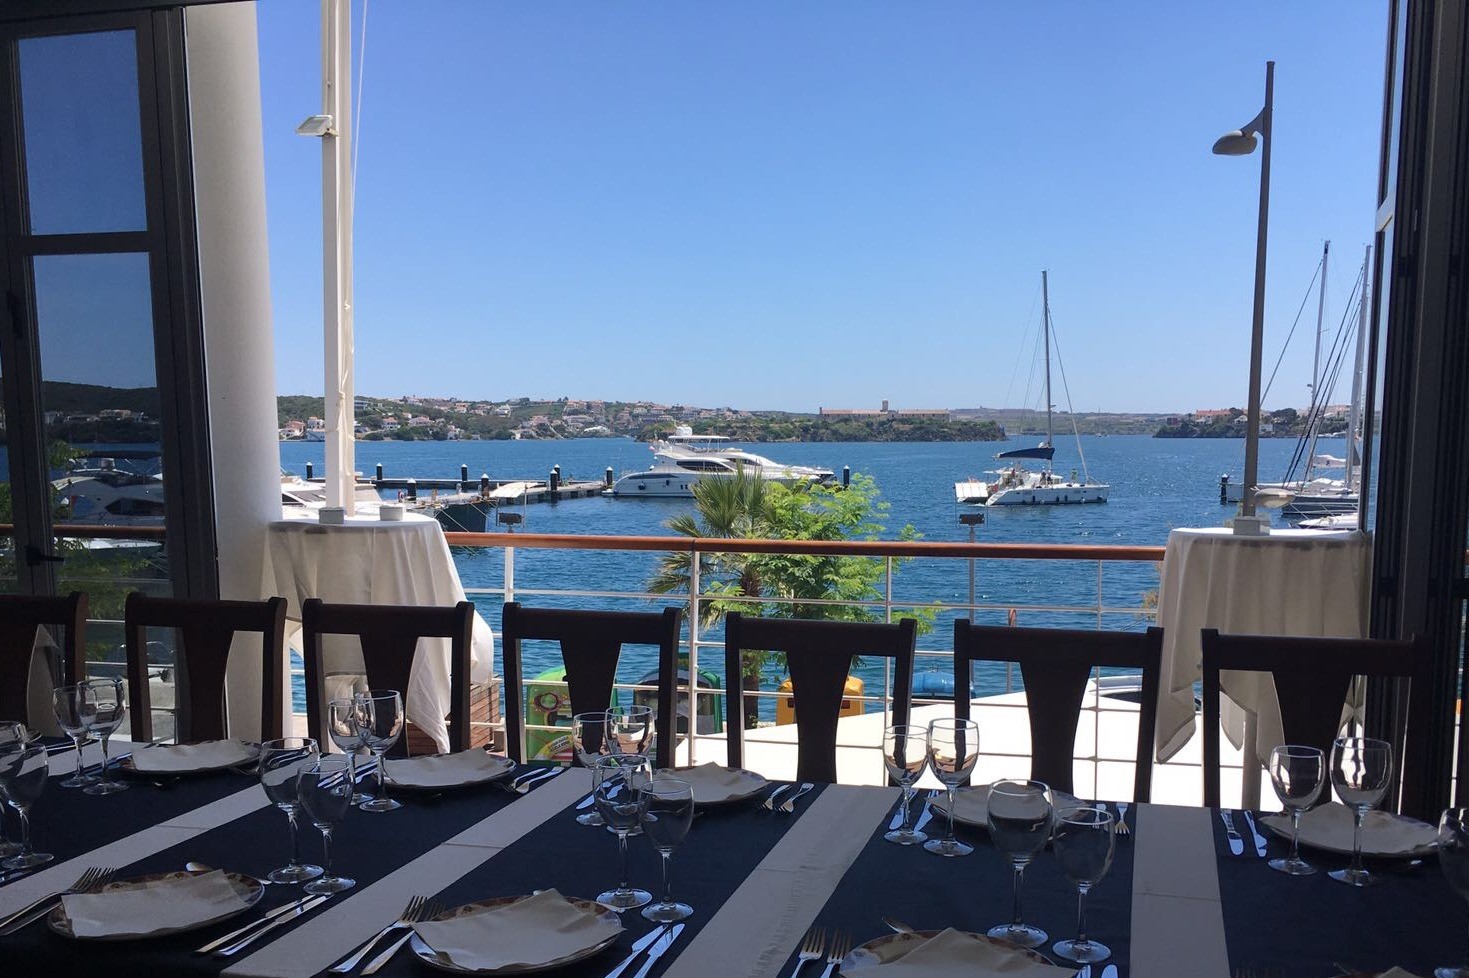 View of Port from restaurant in Mahon Port